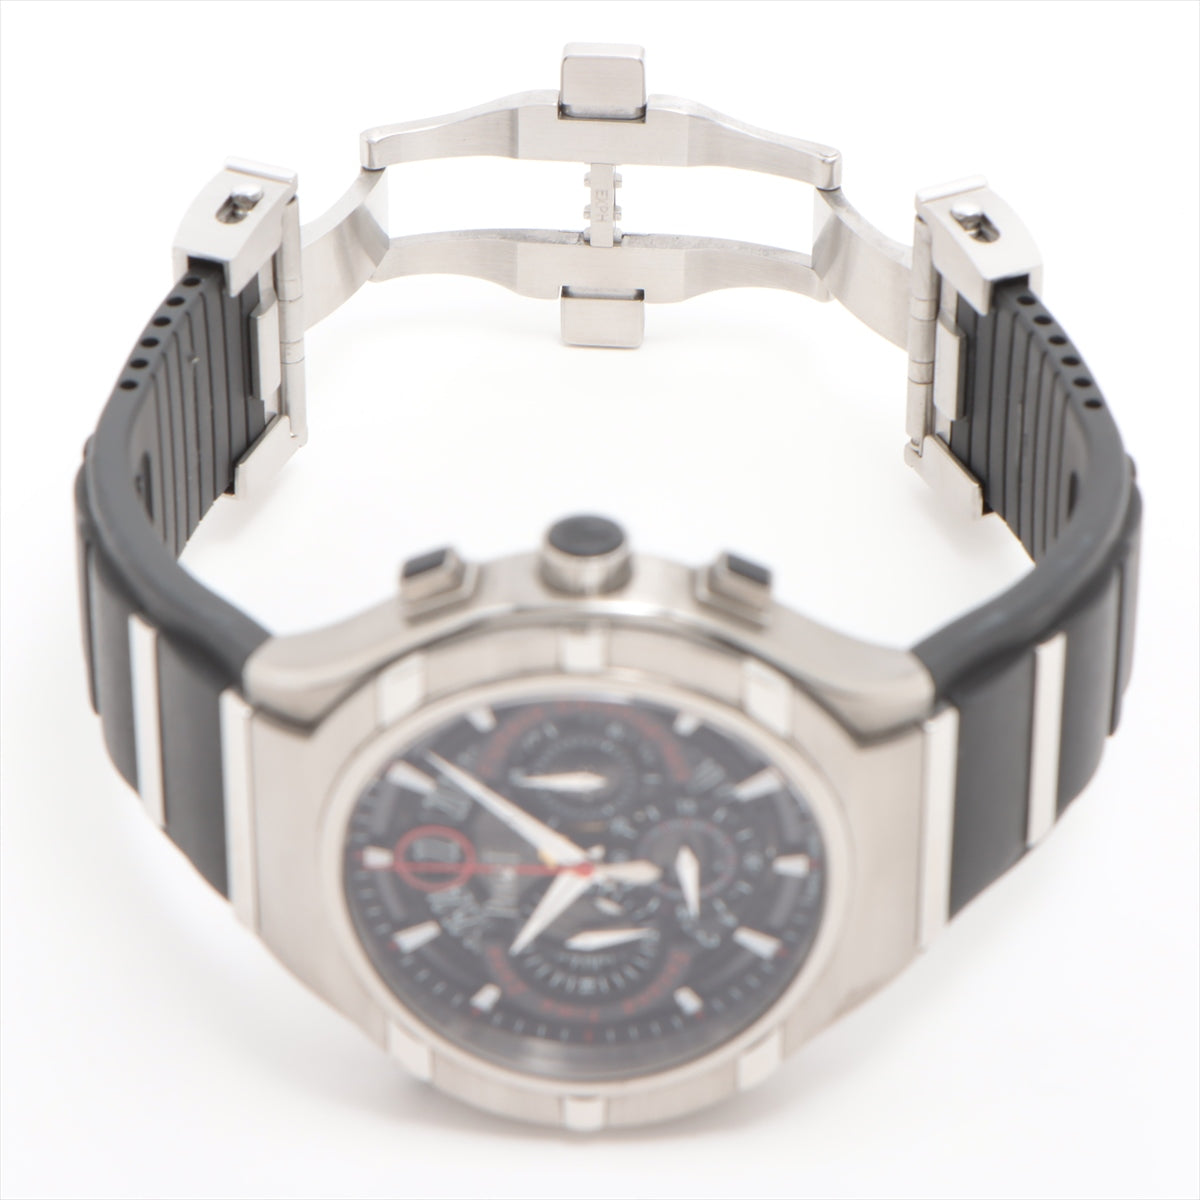 Piaget Polo 45 Flyback chronograph GOA35001 SS & Rubber AT Black Dial Limited to 500 books in the world